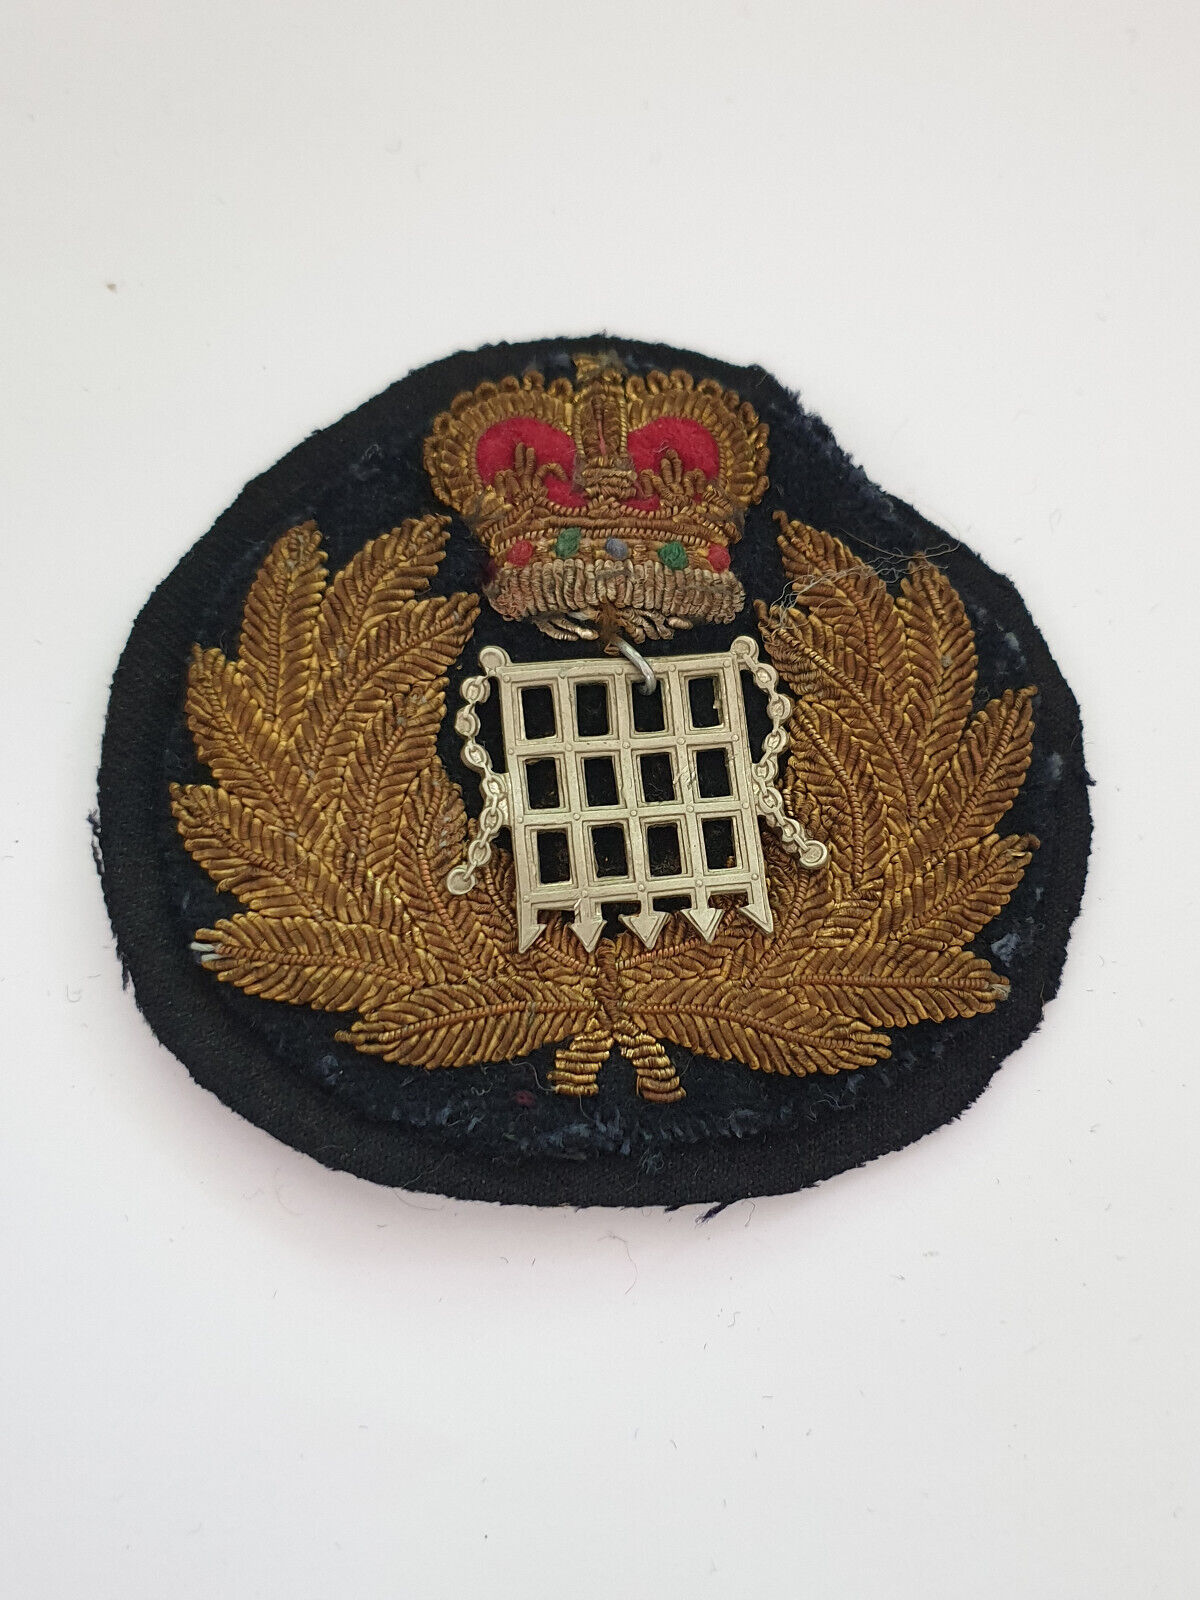 Vintage and very old Customs & Excise Officers Cap Badge